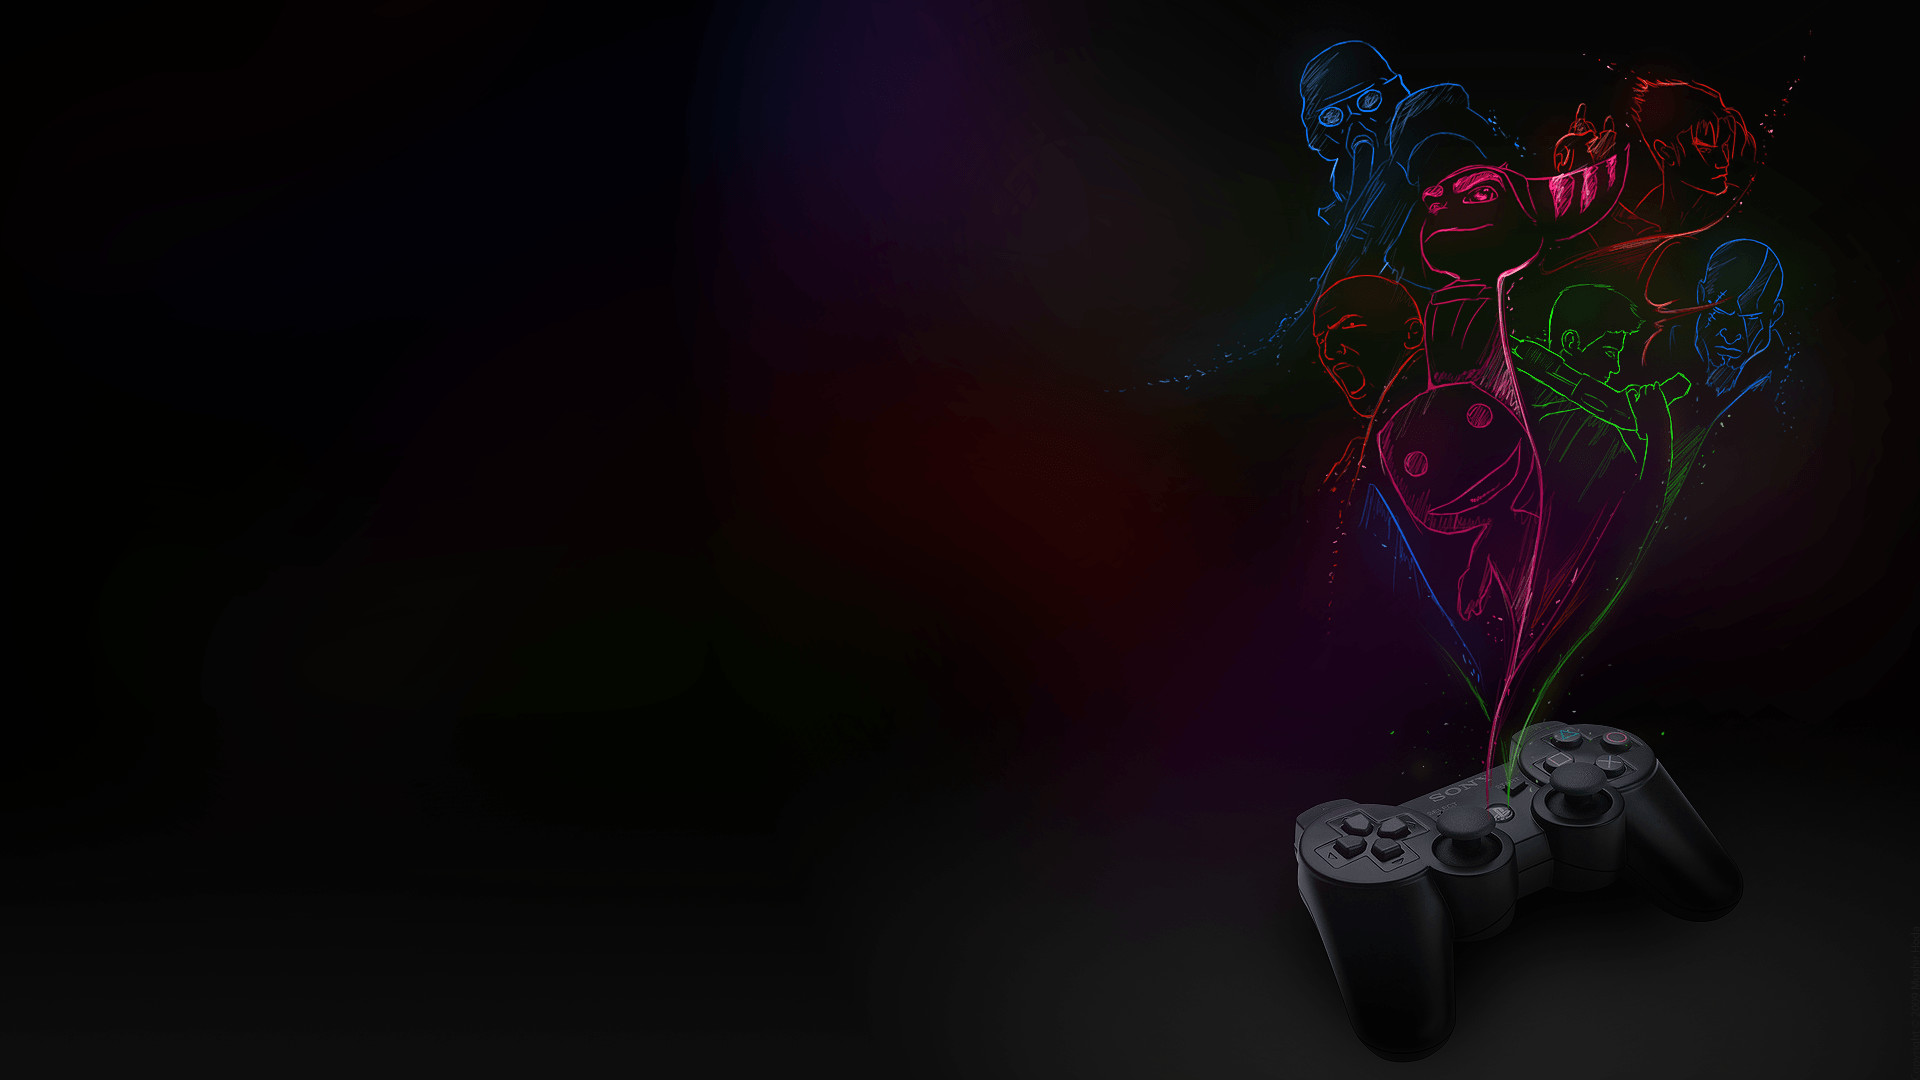 1920x1080 PS3 Wallpaper I made - PlayStation 3 - Giant Bomb